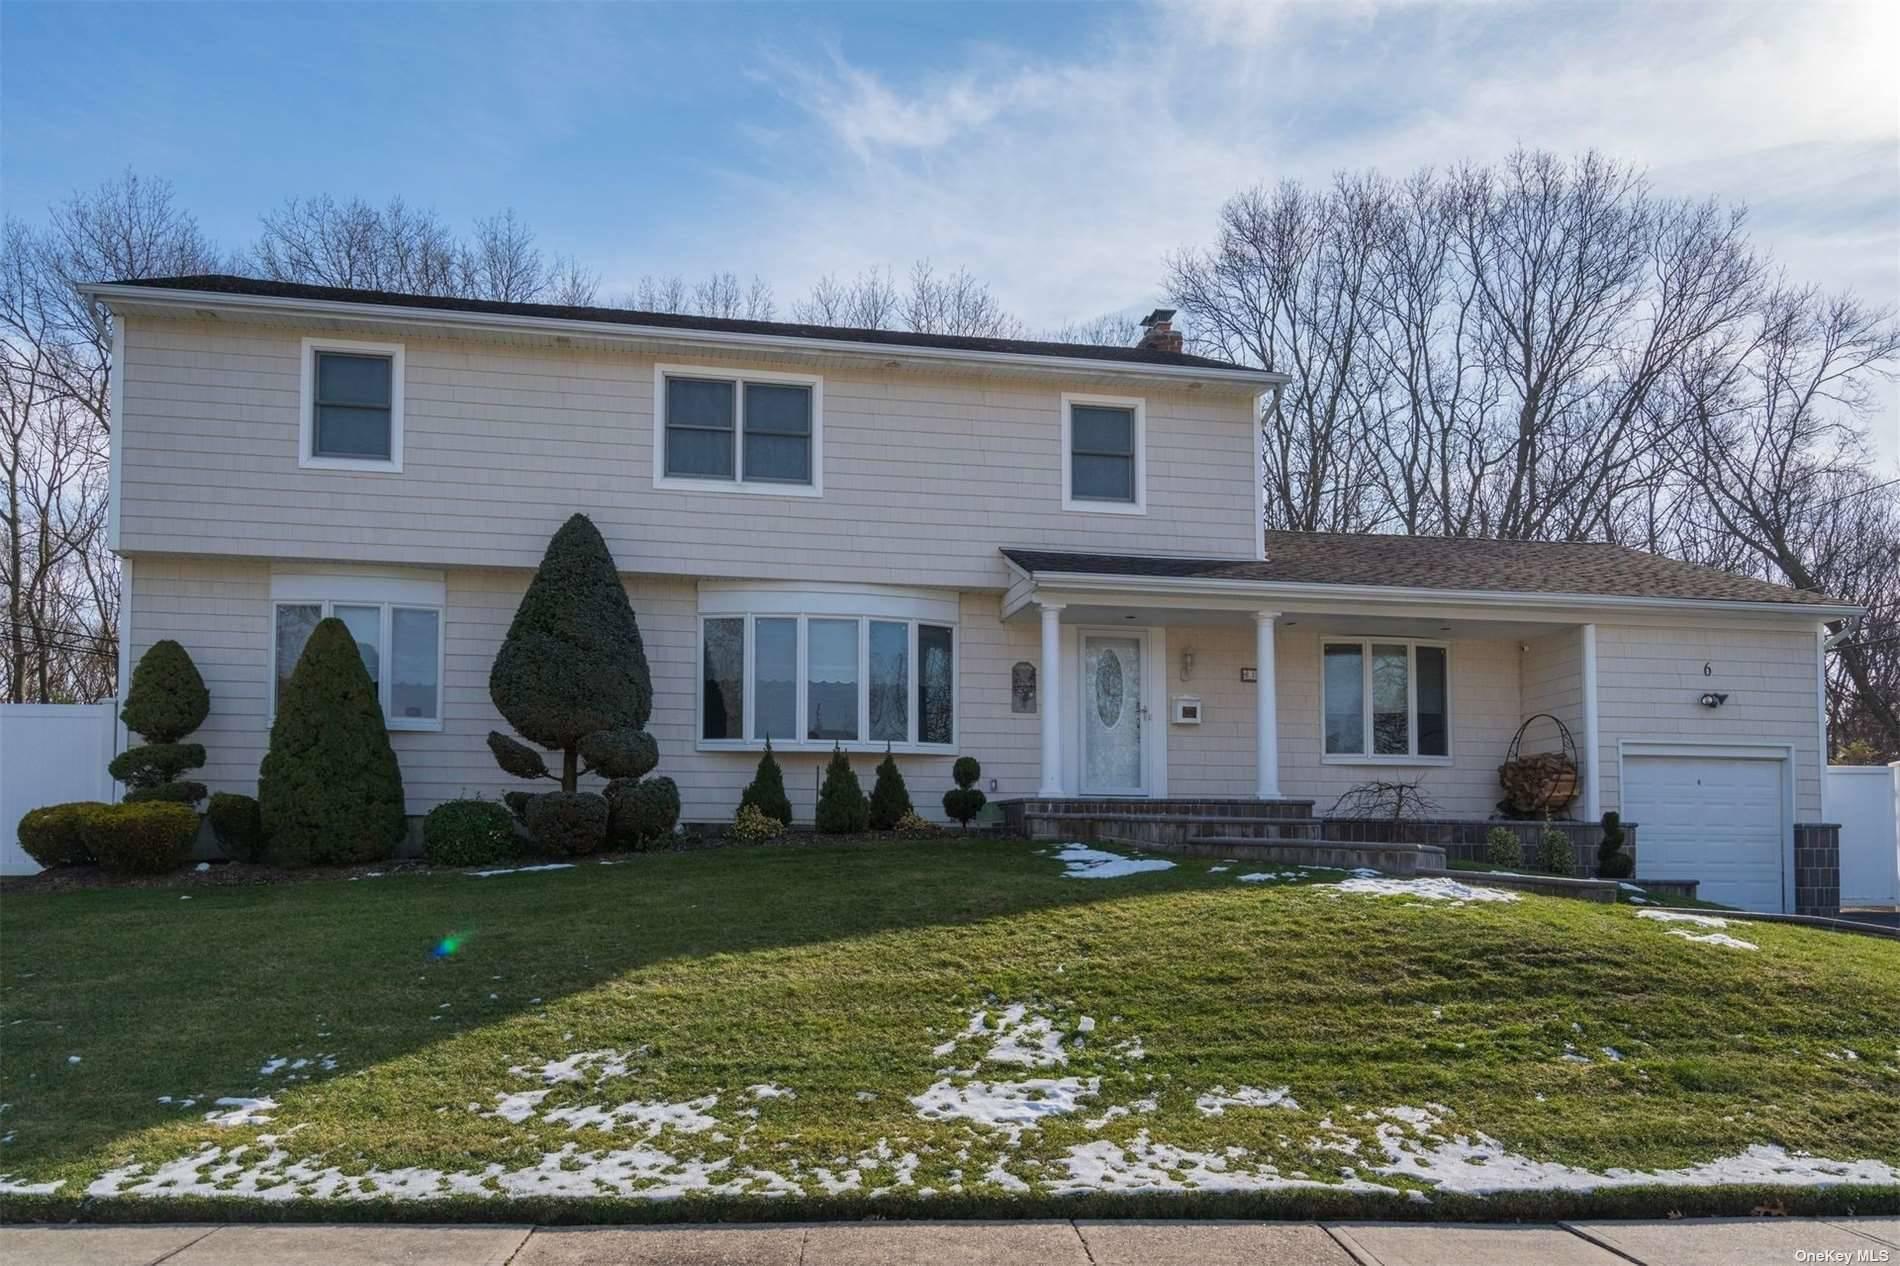 6 Elm Drive in Long Island, Old Bethpage, NY 11804